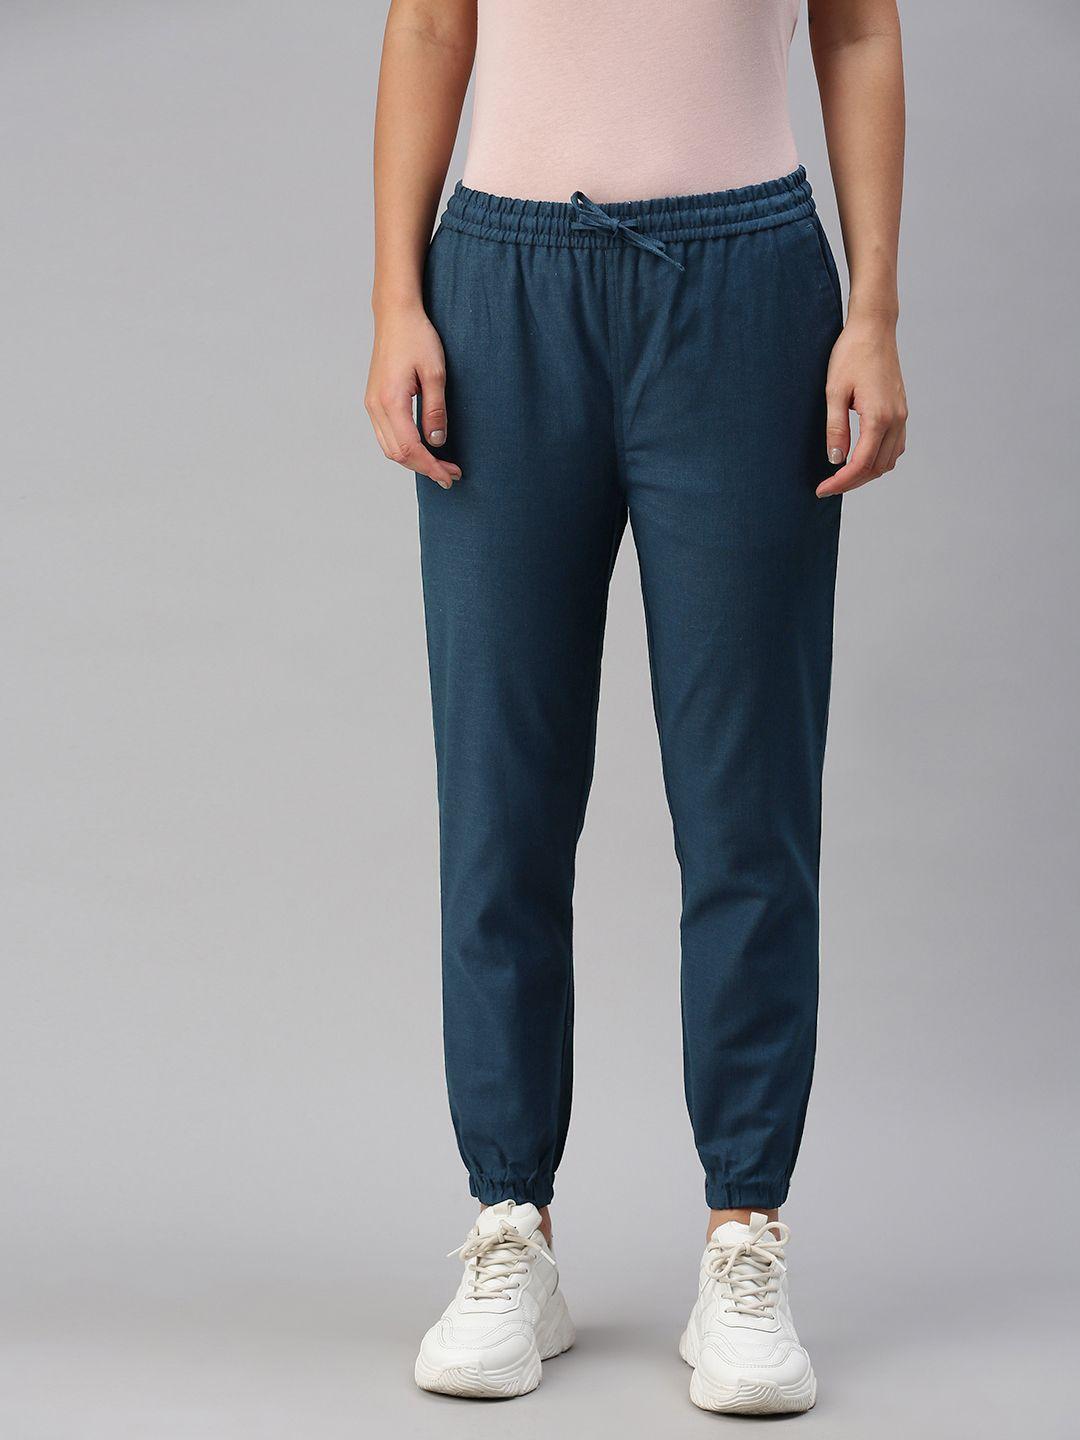 the souled store women navy blue cotton woven joggers